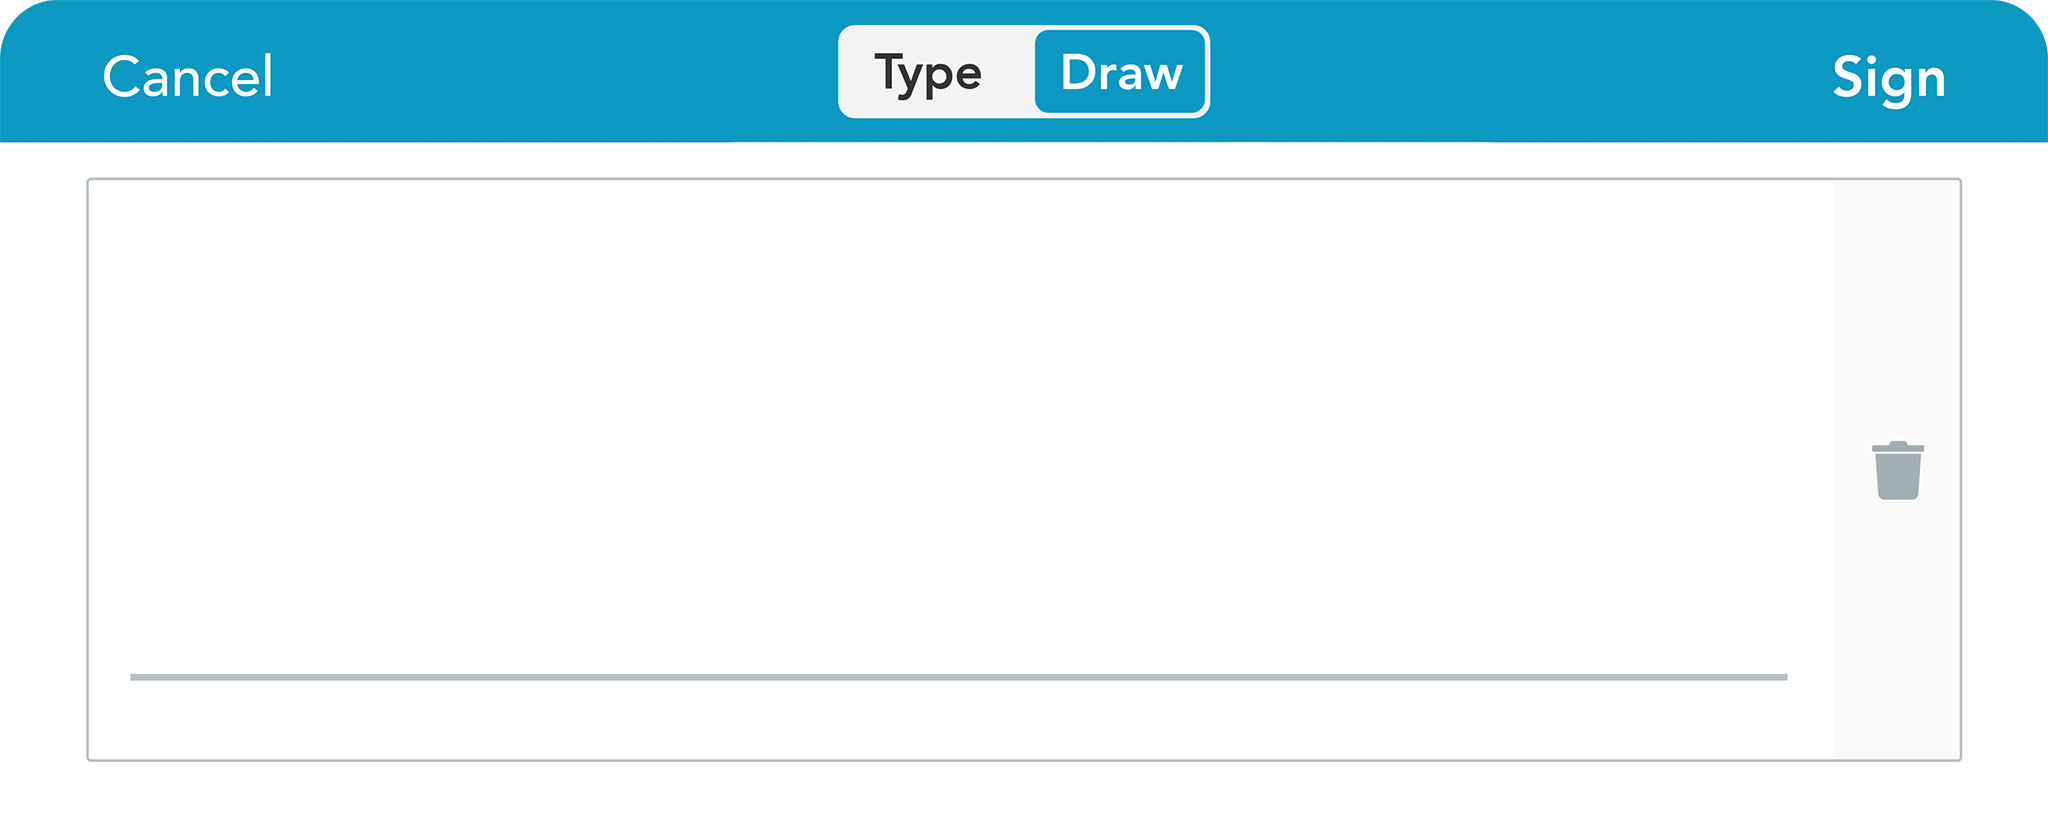 Add customizable fields, like legally binding eSignatures, to your digital forms.